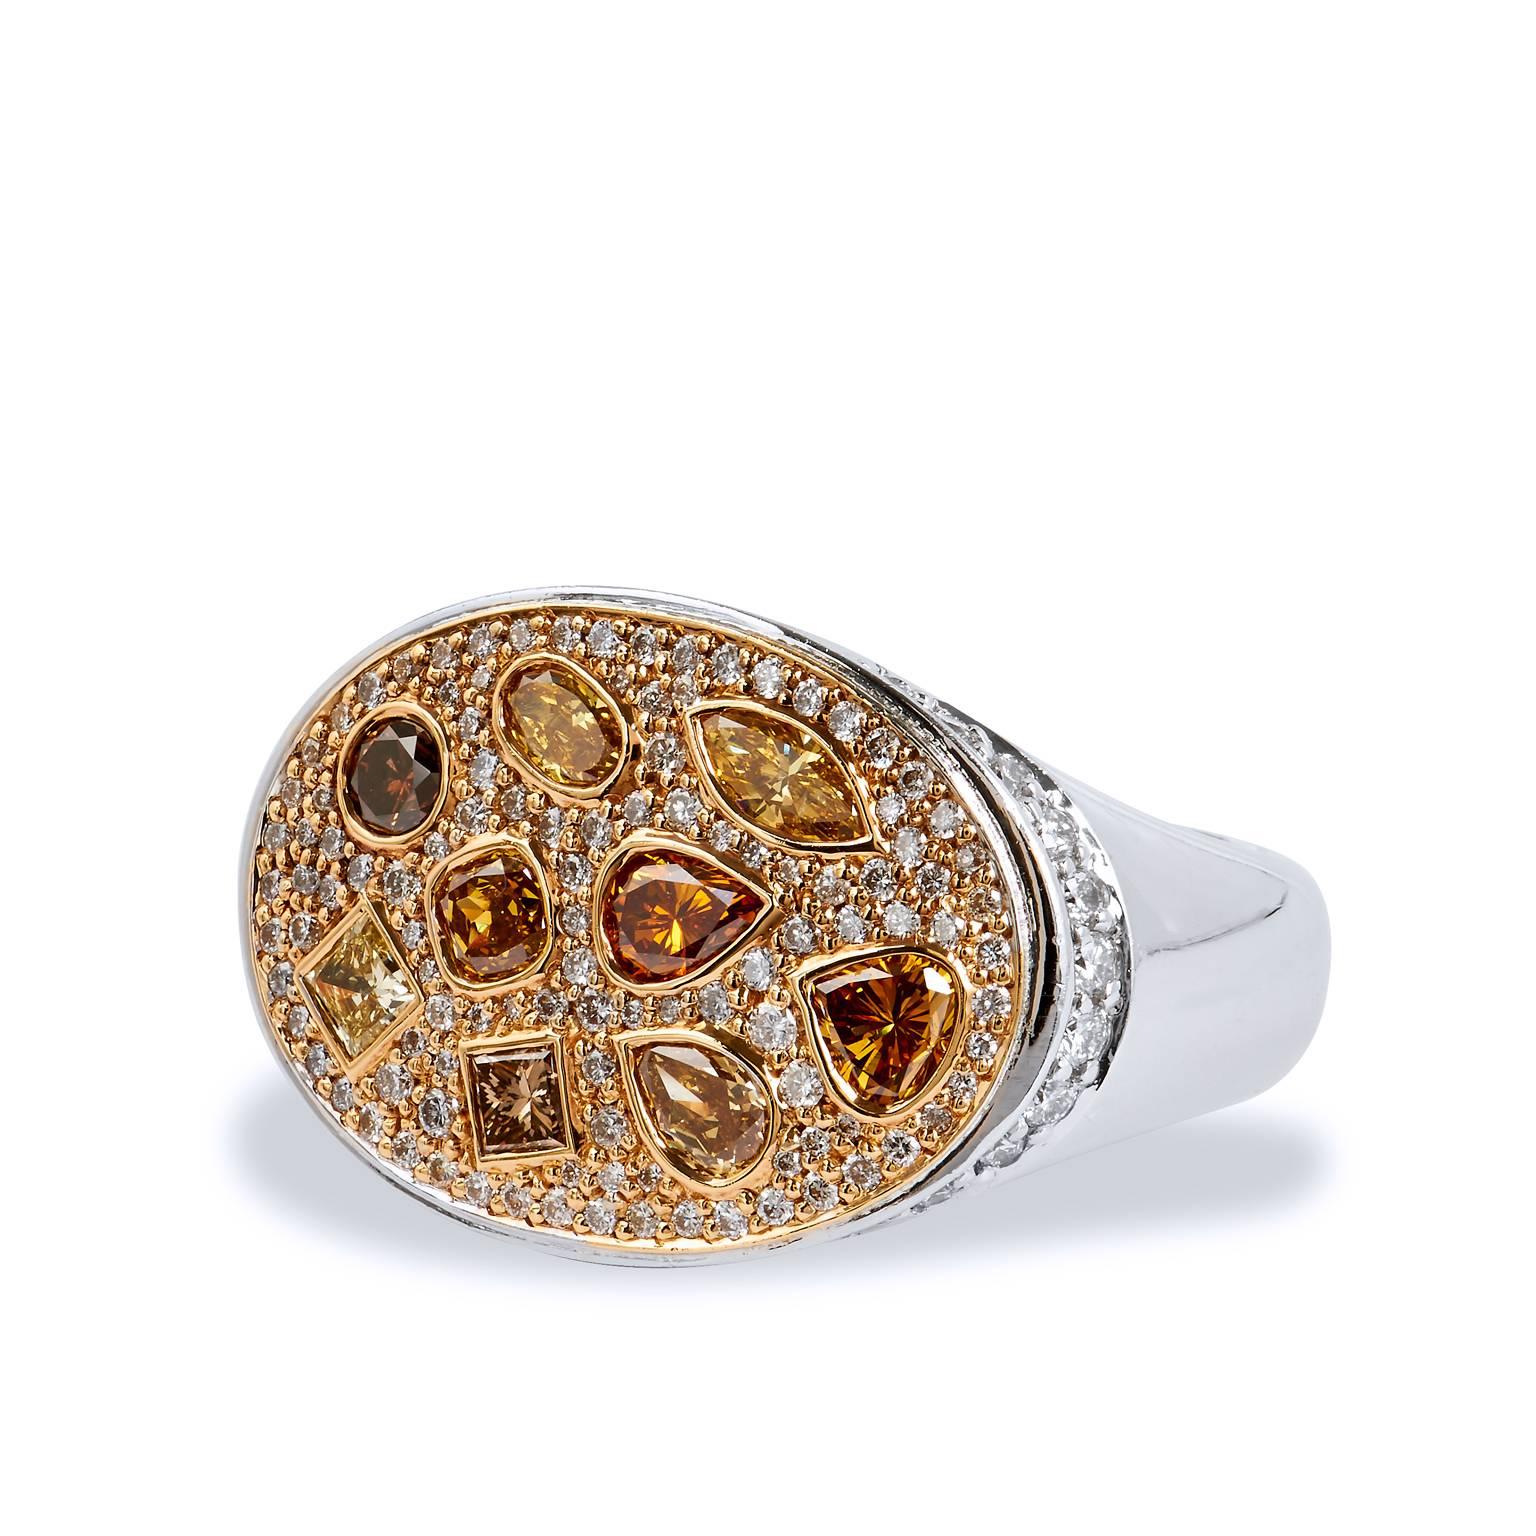 Hans D. Krieger 18 karat Yellow and White Gold with Colored Diamonds Oval Ring

Crafted by one of the most beloved designers in jewelry, this Hans D. Krieger ring will take your breath away. Featuring 1.25 carat of natural color diamonds set upon a